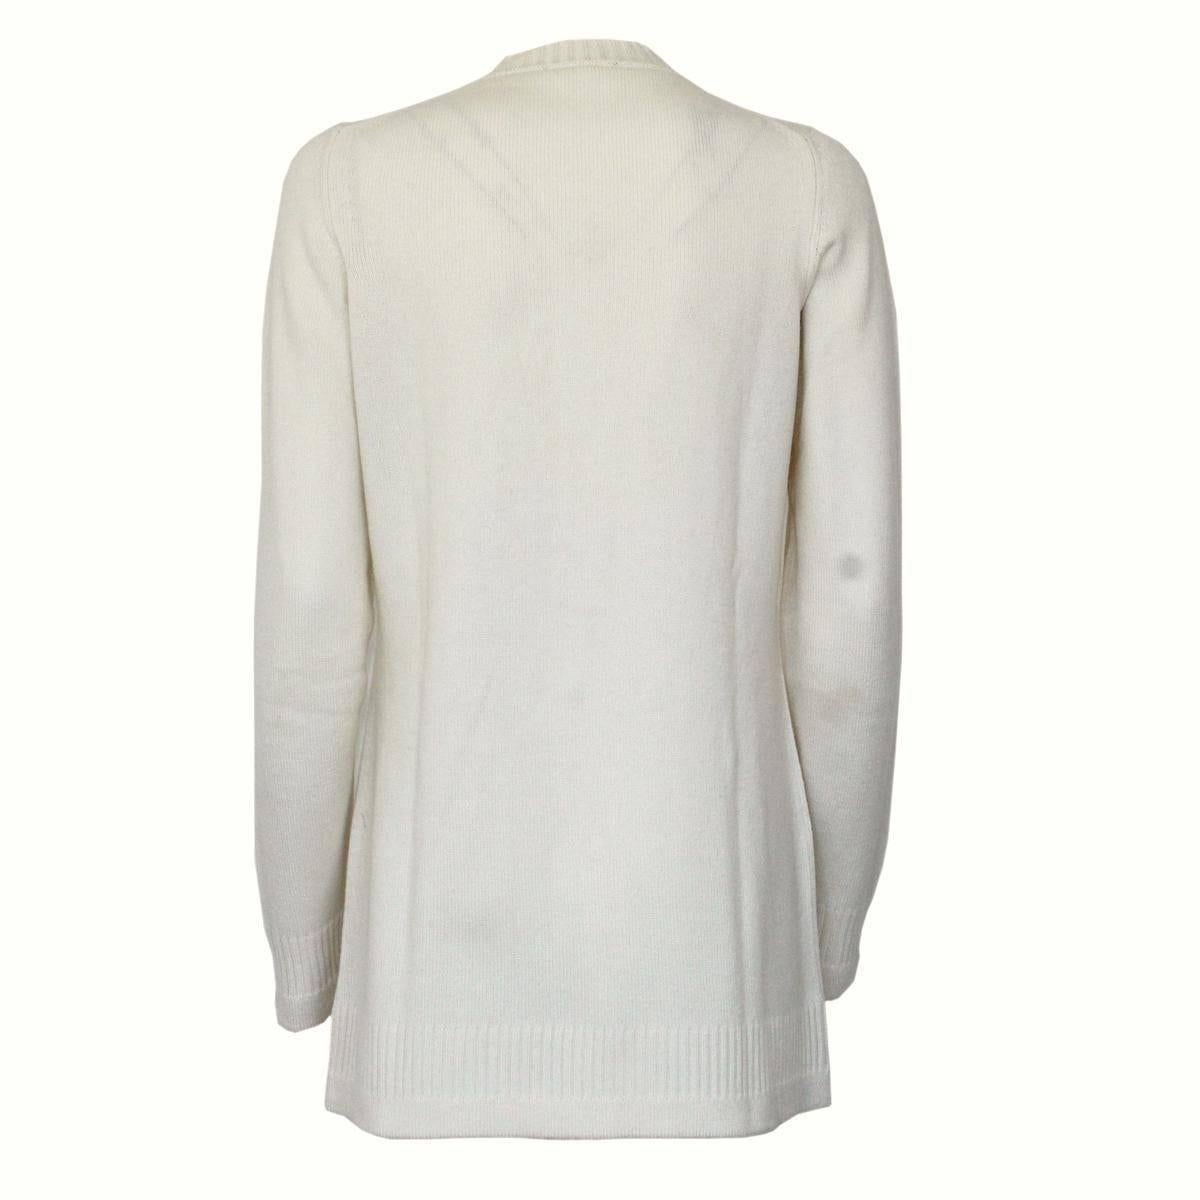 Iconic Chanel cashmere cardigan
100% cashmere
Cream color
Button closure with Chanel logo
Long sleeve
4 pockets
Lenght from shoulder cm 68 (26.7 inches)
Internal Chanel tag removed by previous owner
Worldwide express shipping included in the price